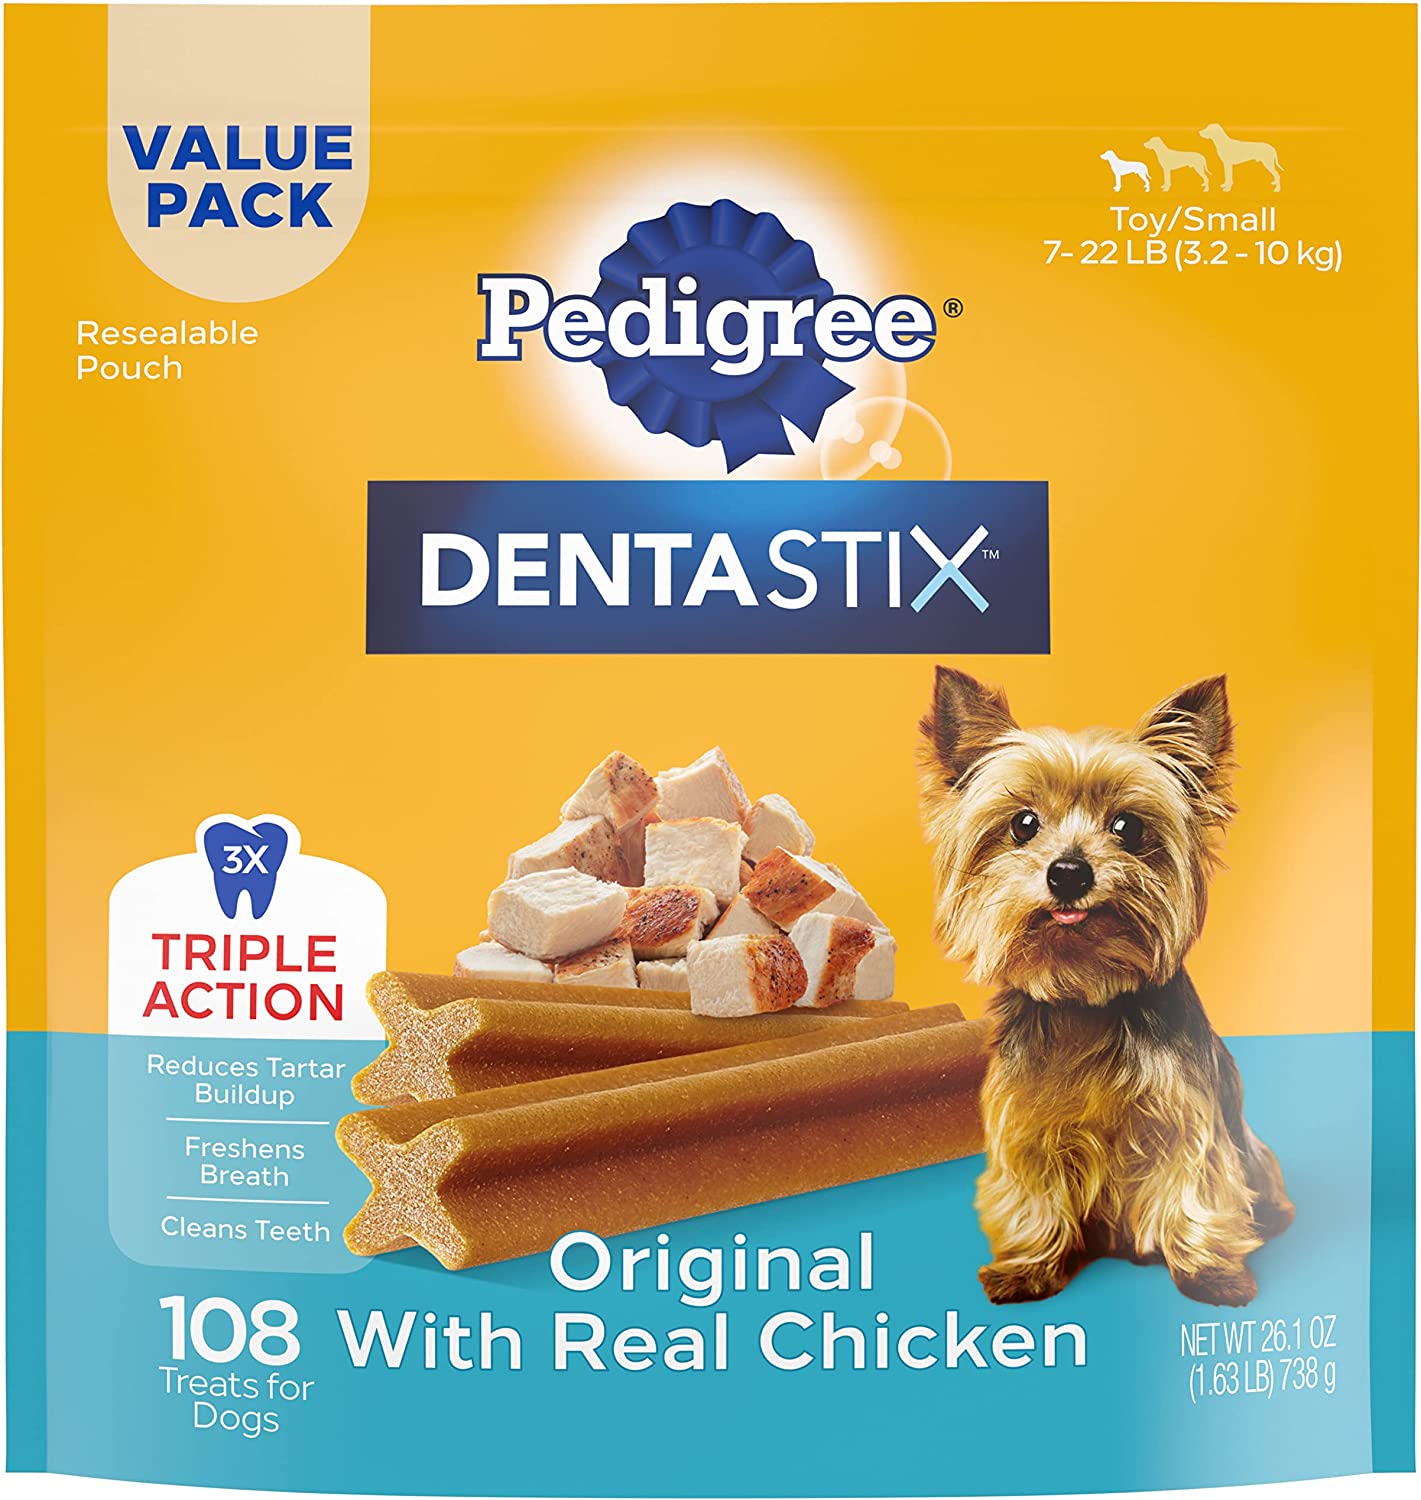 PEDIGREE DENTASTIX Toy/Small Dog Dental Treats Original Flavor (108 Treats) for $7.73 after $5 coupon and S&S